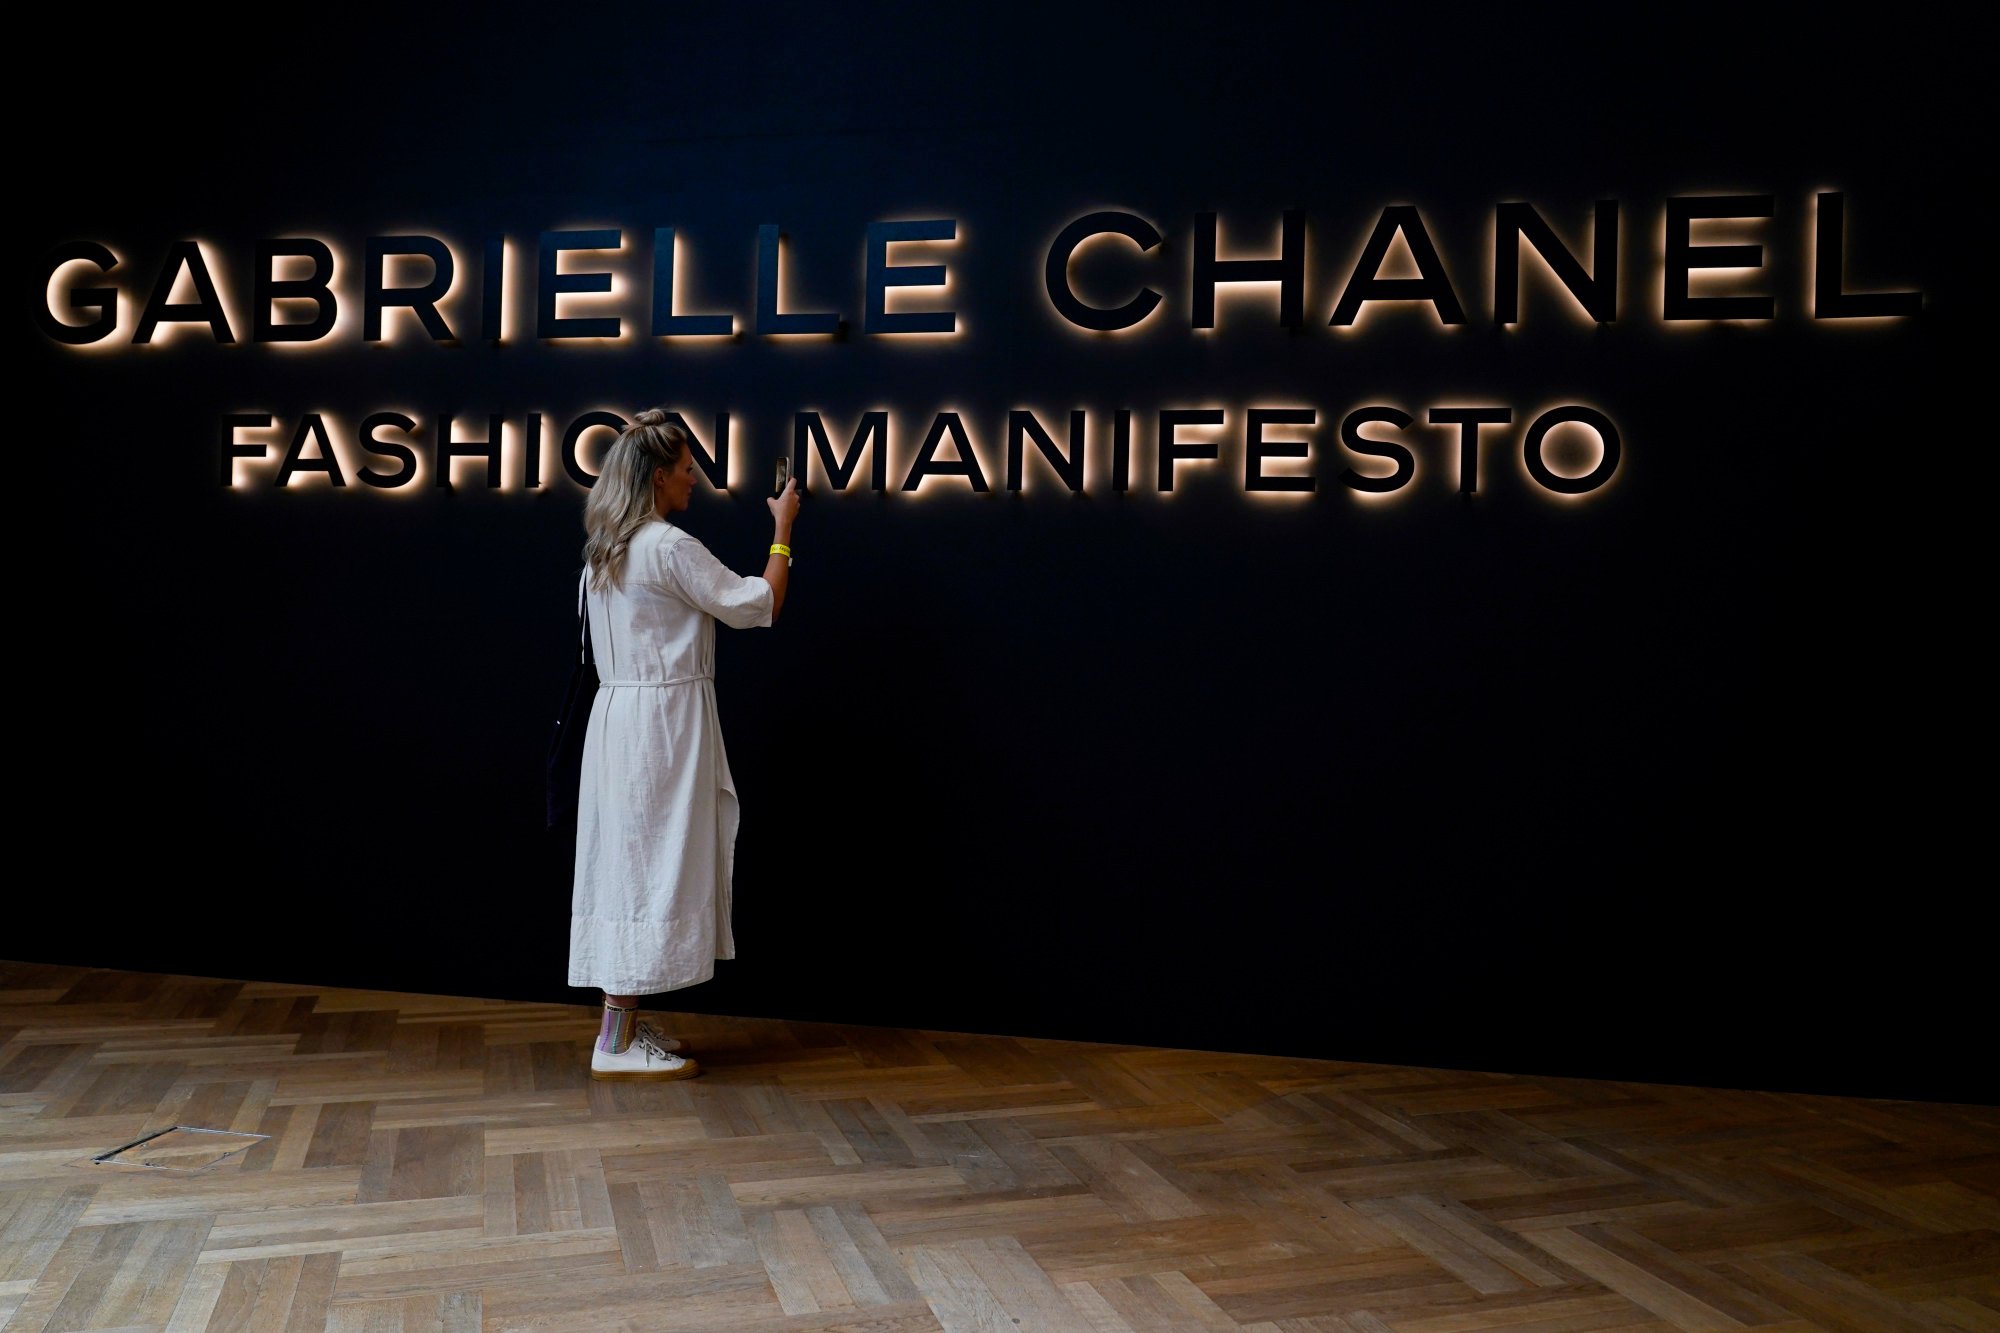 London's V&A hosts new Chanel exhibition